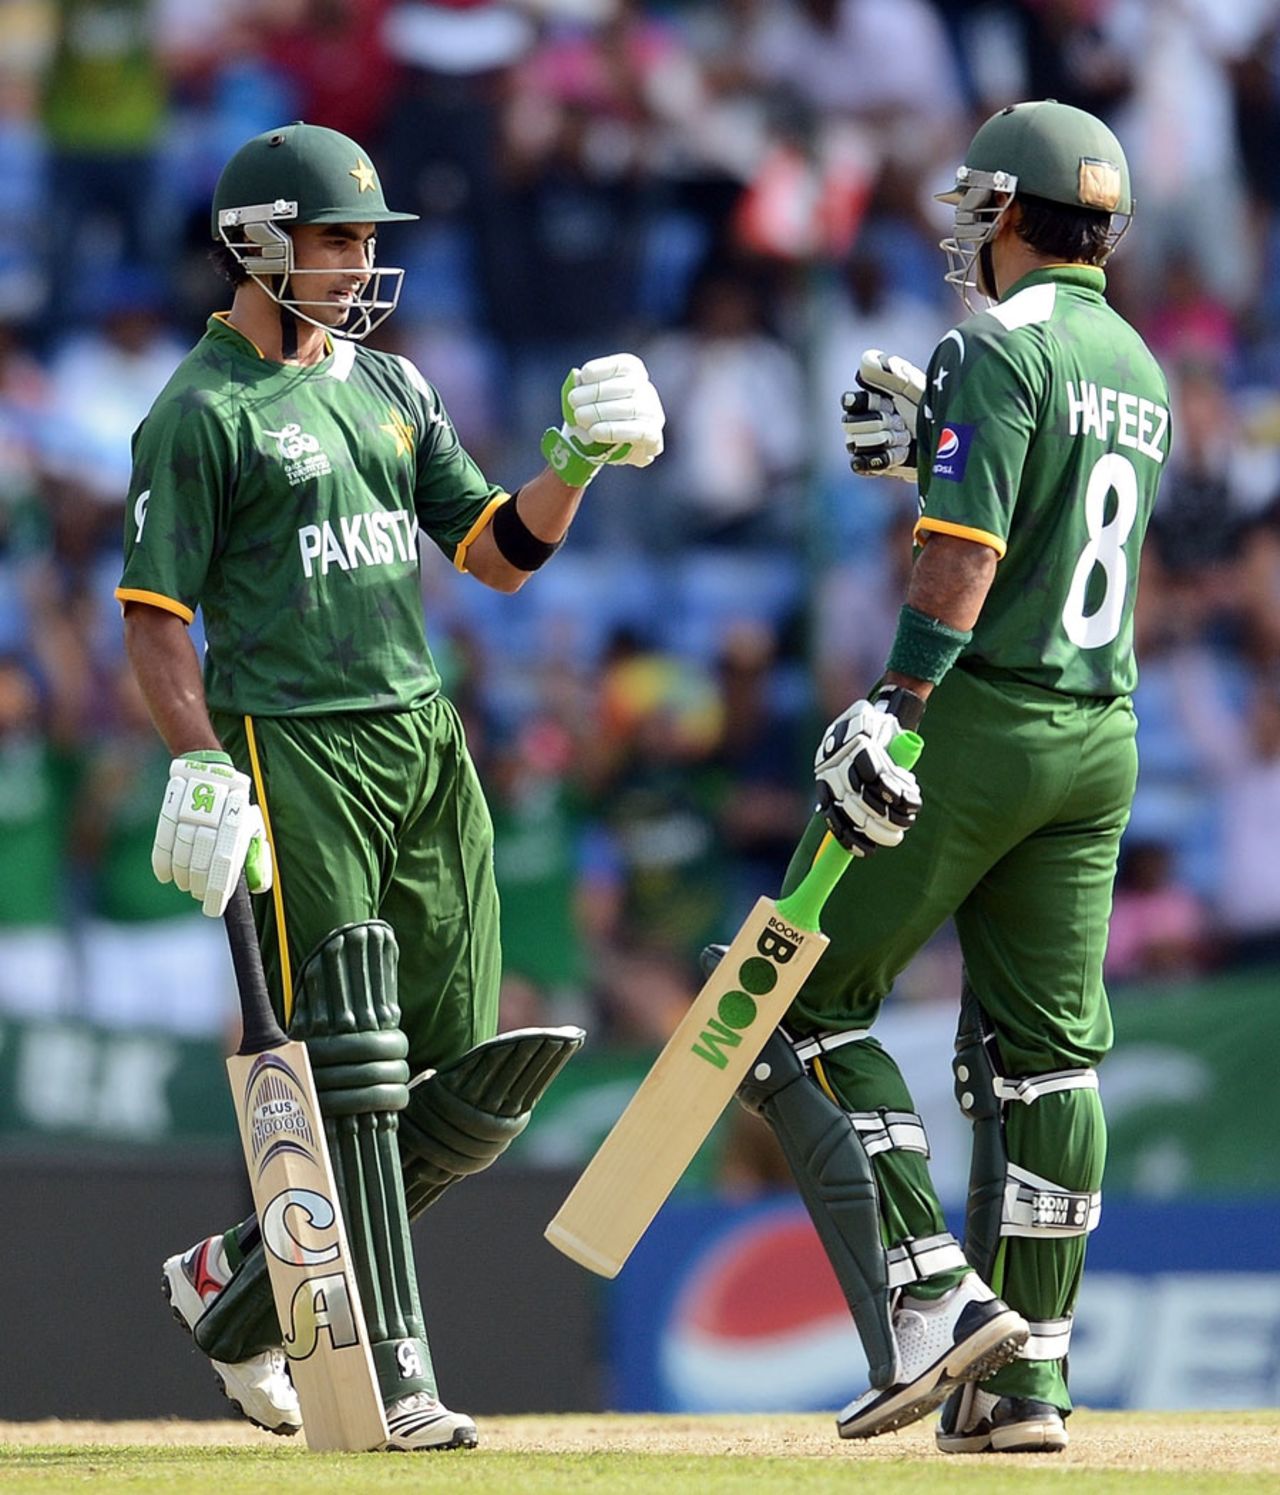 Mohammad Hafeez and Imran Nazir put on 47 in 34 balls for the first wicket, New Zealand v Pakistan, World T20 2012, Group D, Pallekele, September, 23, 2012